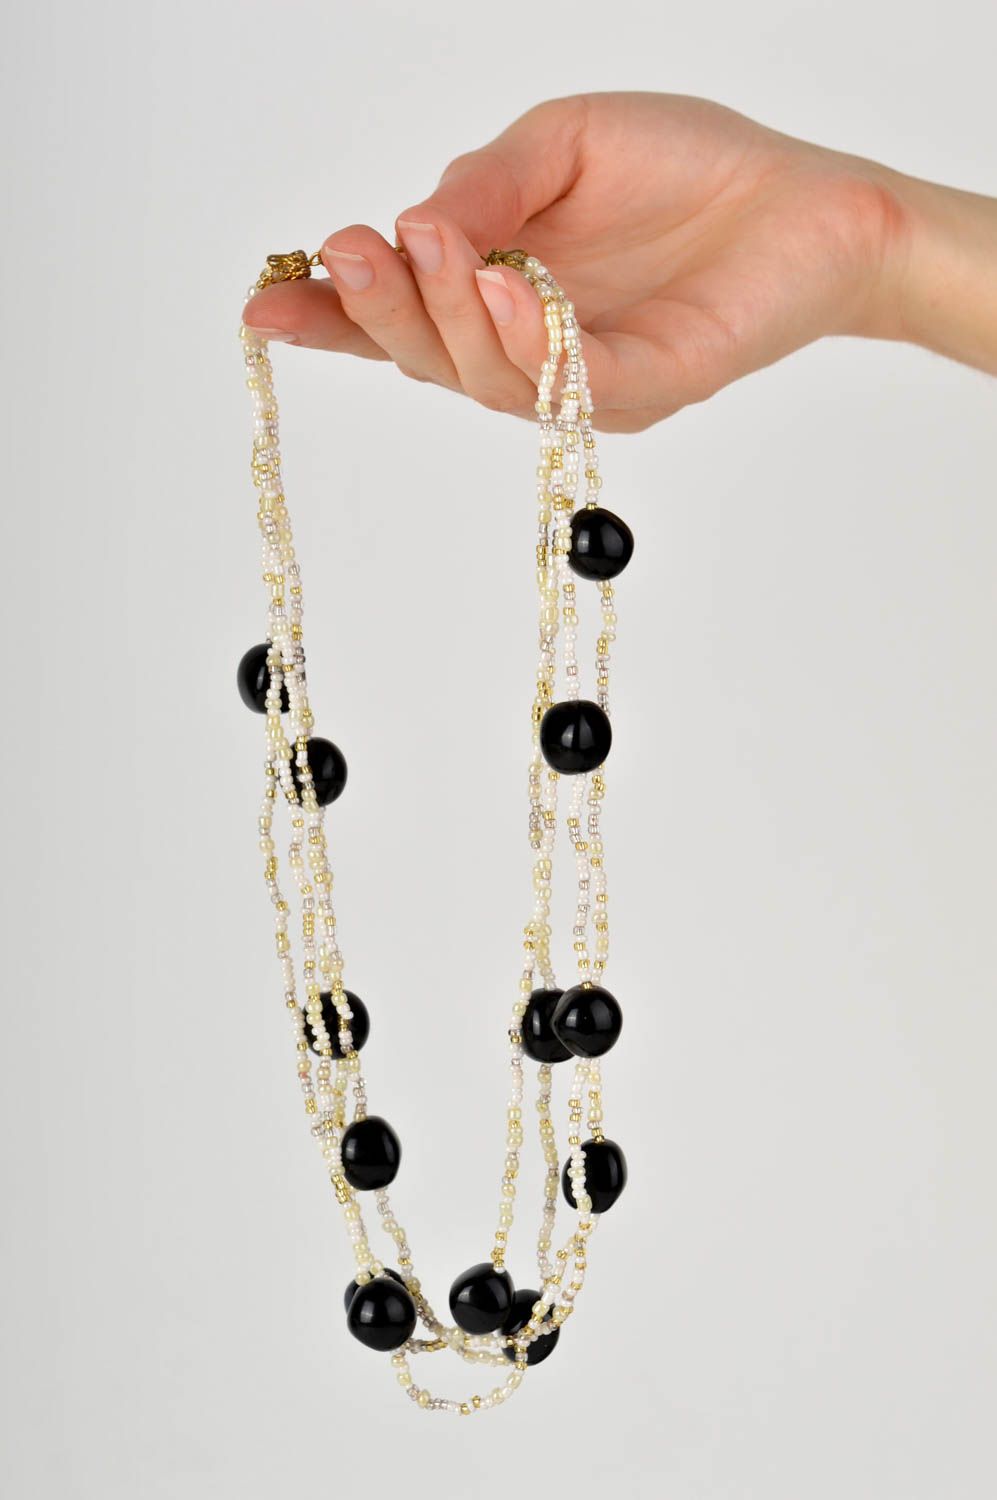 Long handmade beaded necklace cute bead necklace design accessories for girls photo 5